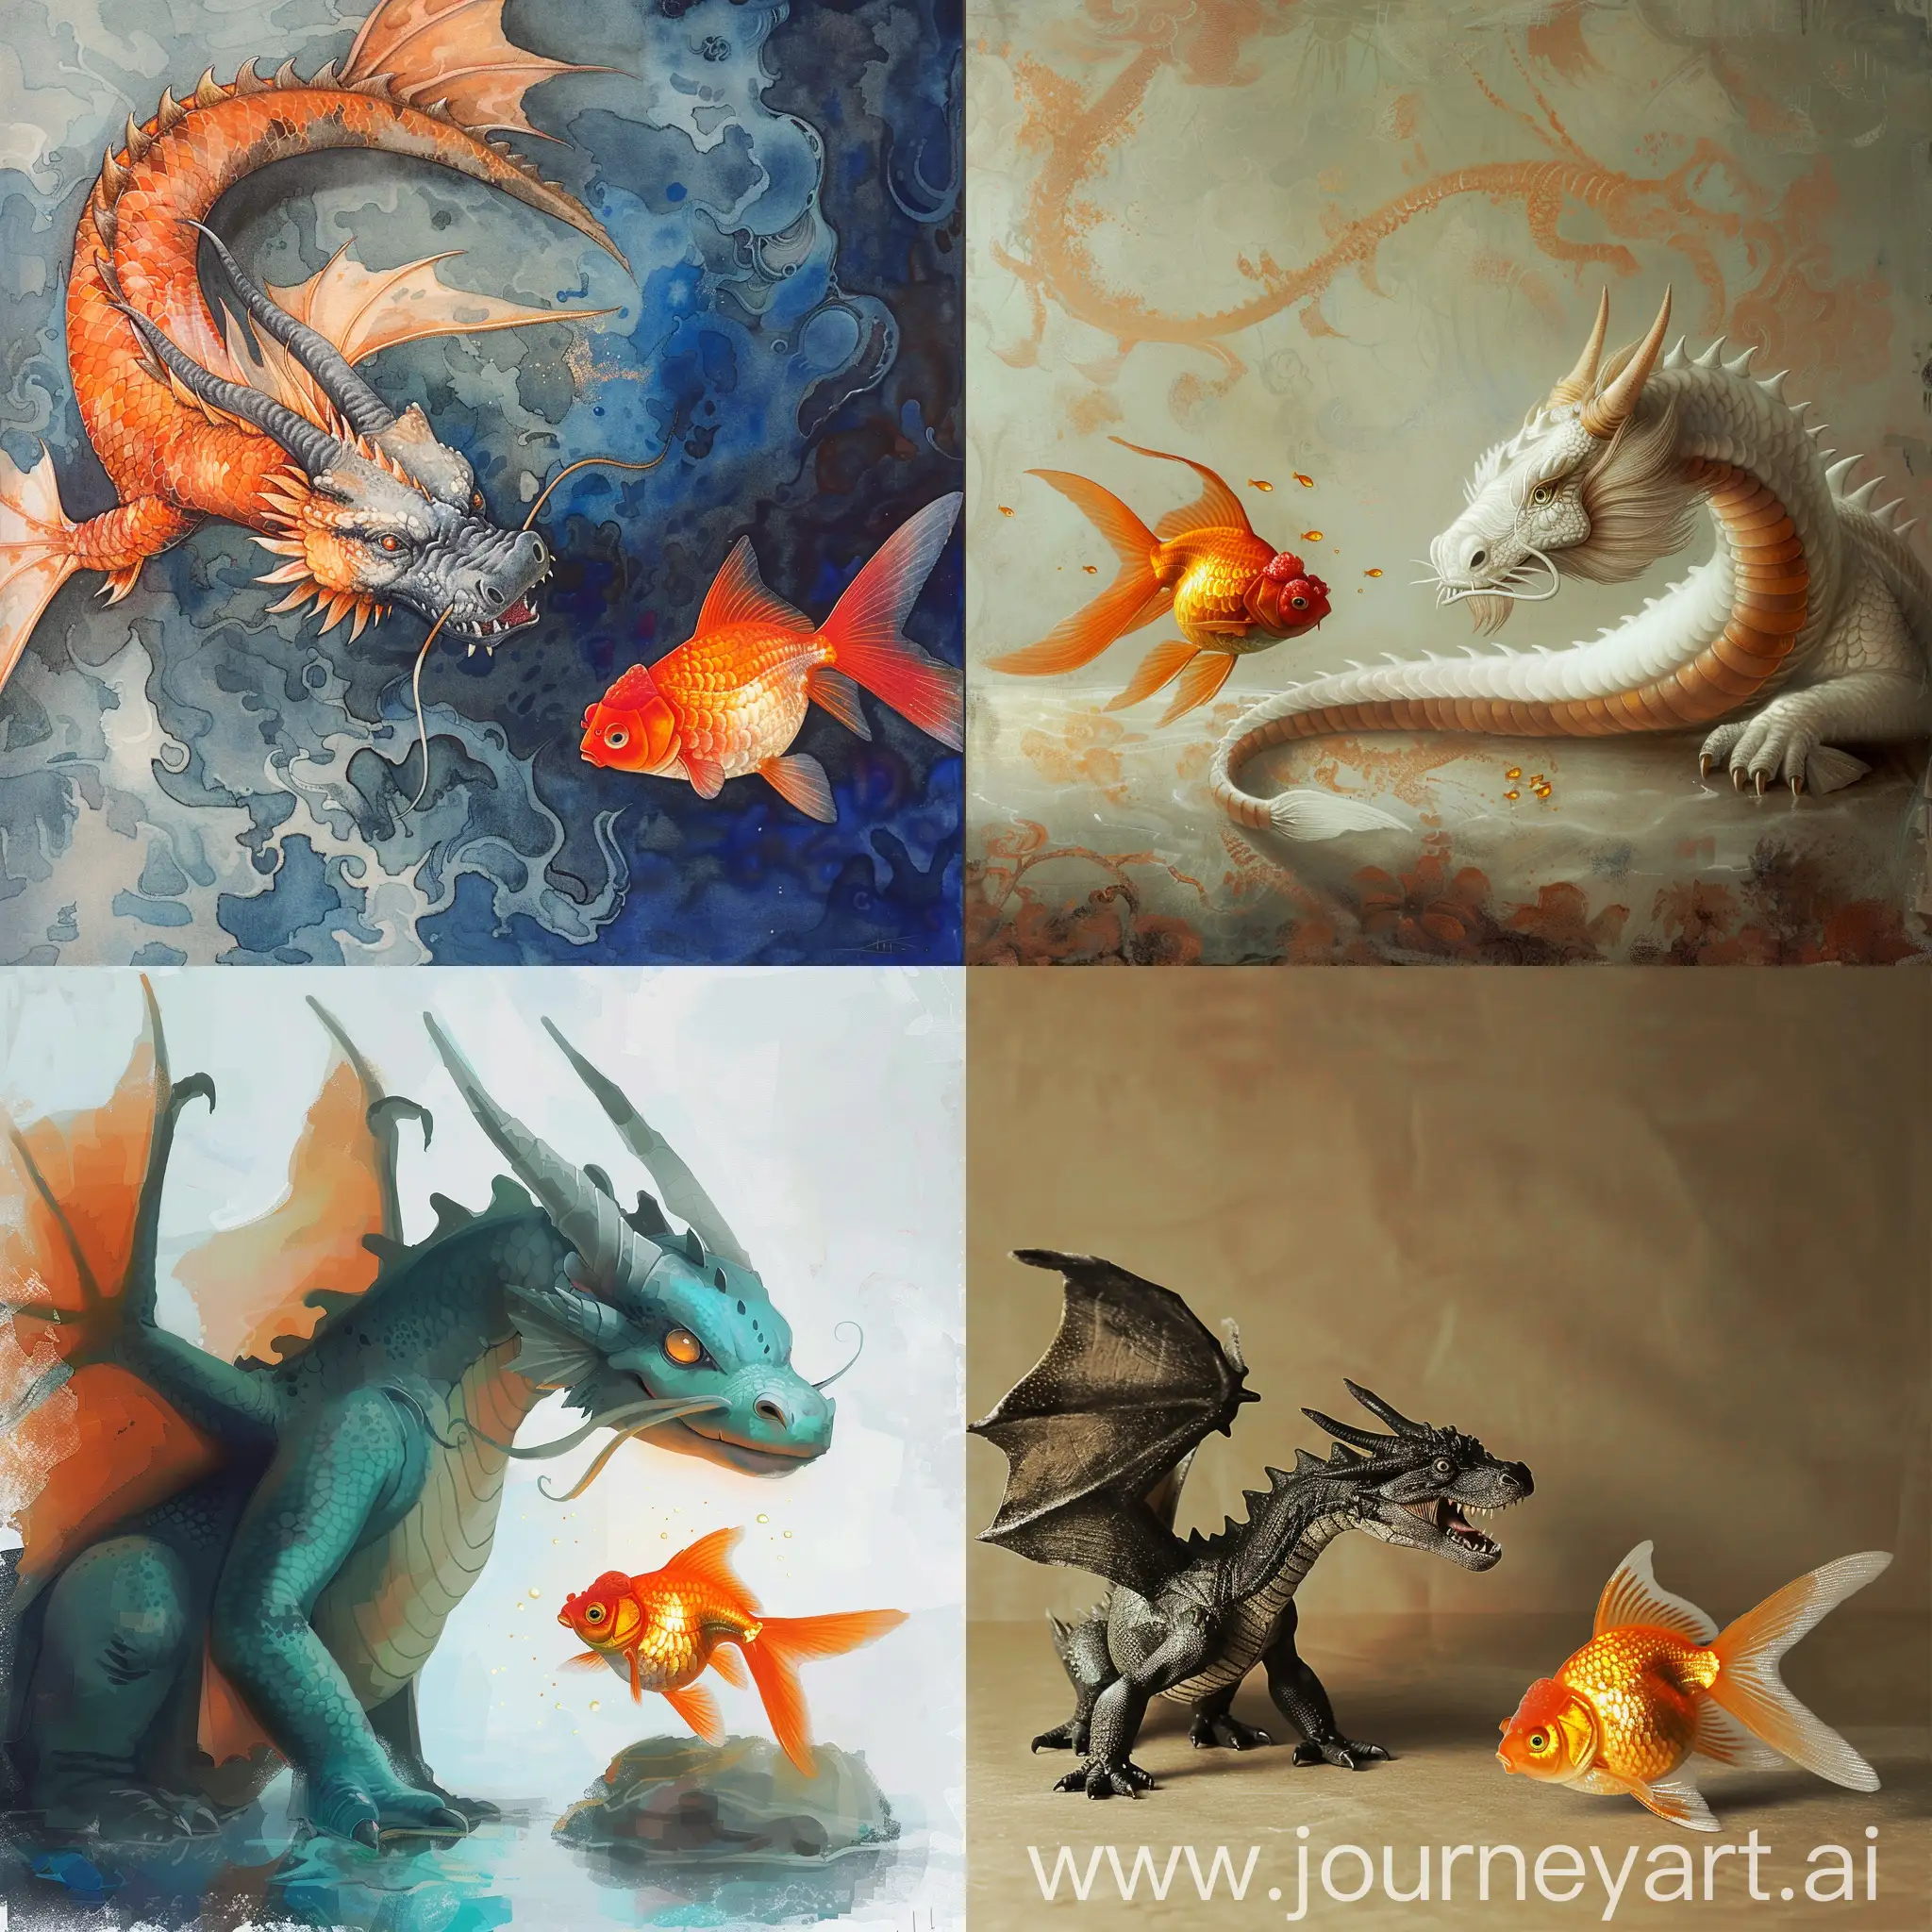 Epic-Battle-Brave-Warrior-Conquers-Enormous-Dragon-Overlooking-Tiny-Goldfish